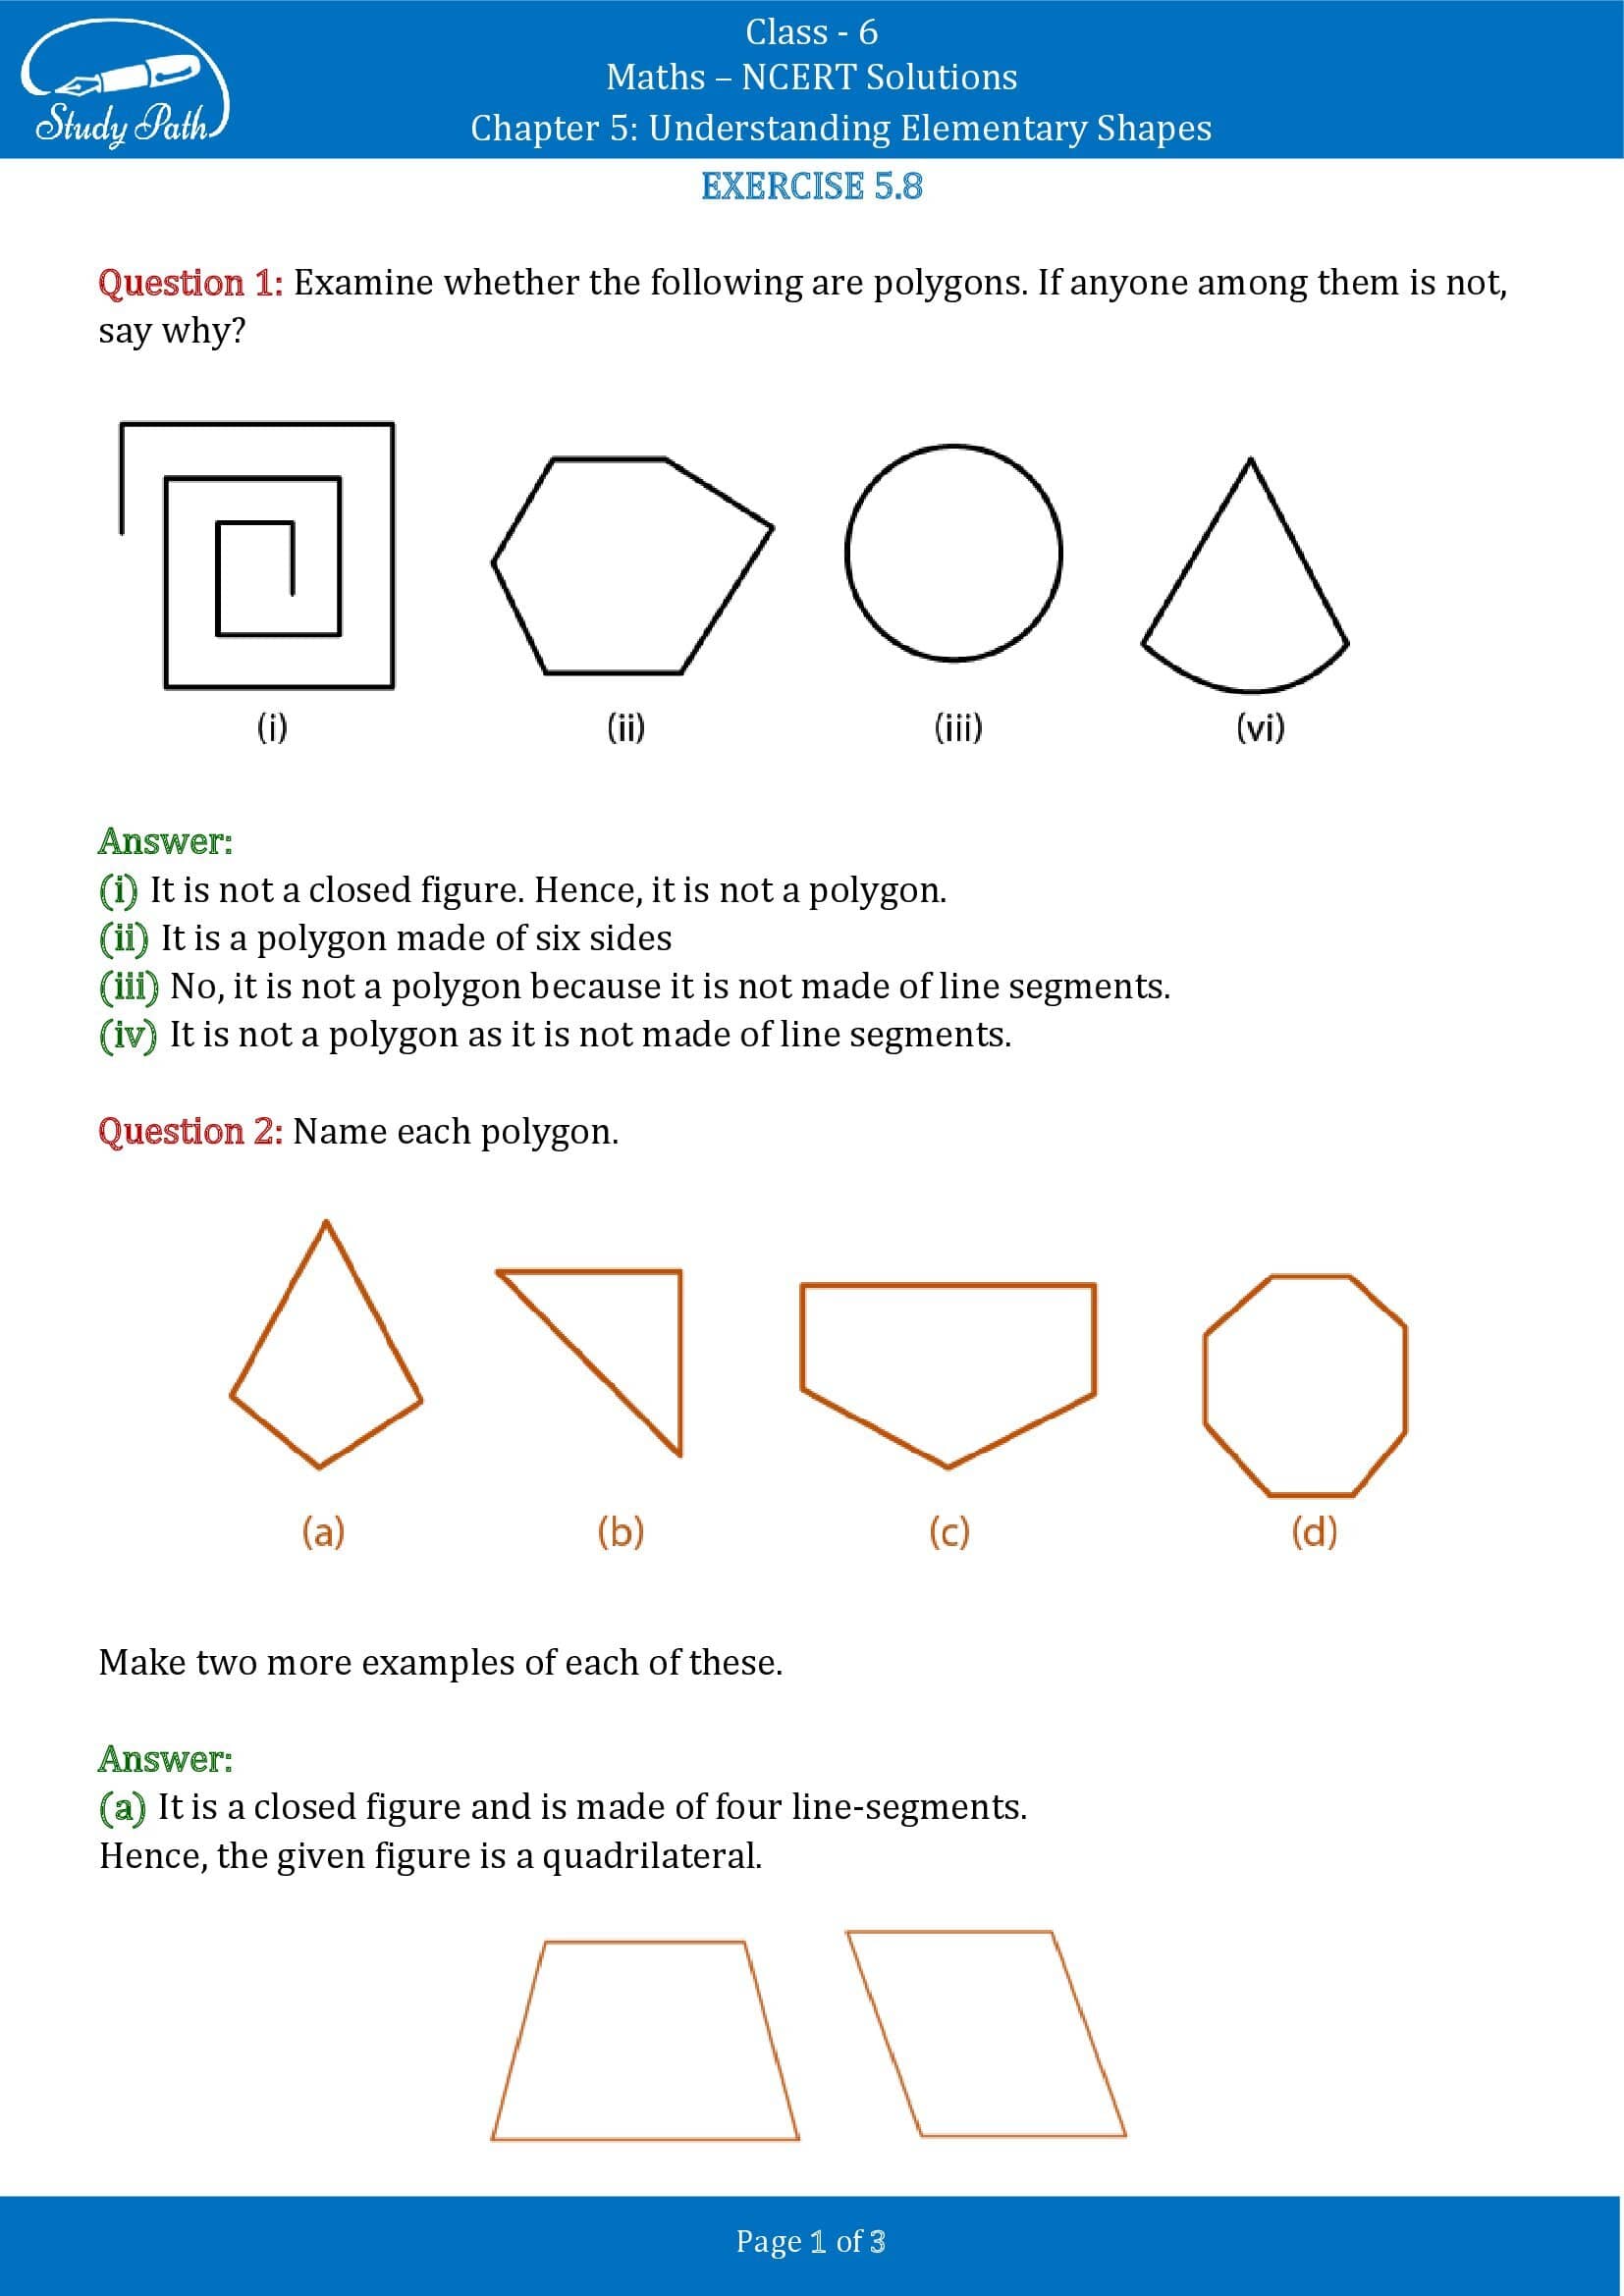 NCERT Solutions for Class 6 Maths Chapter 5 Understanding Elementary Shapes Exercise 5.8 00001